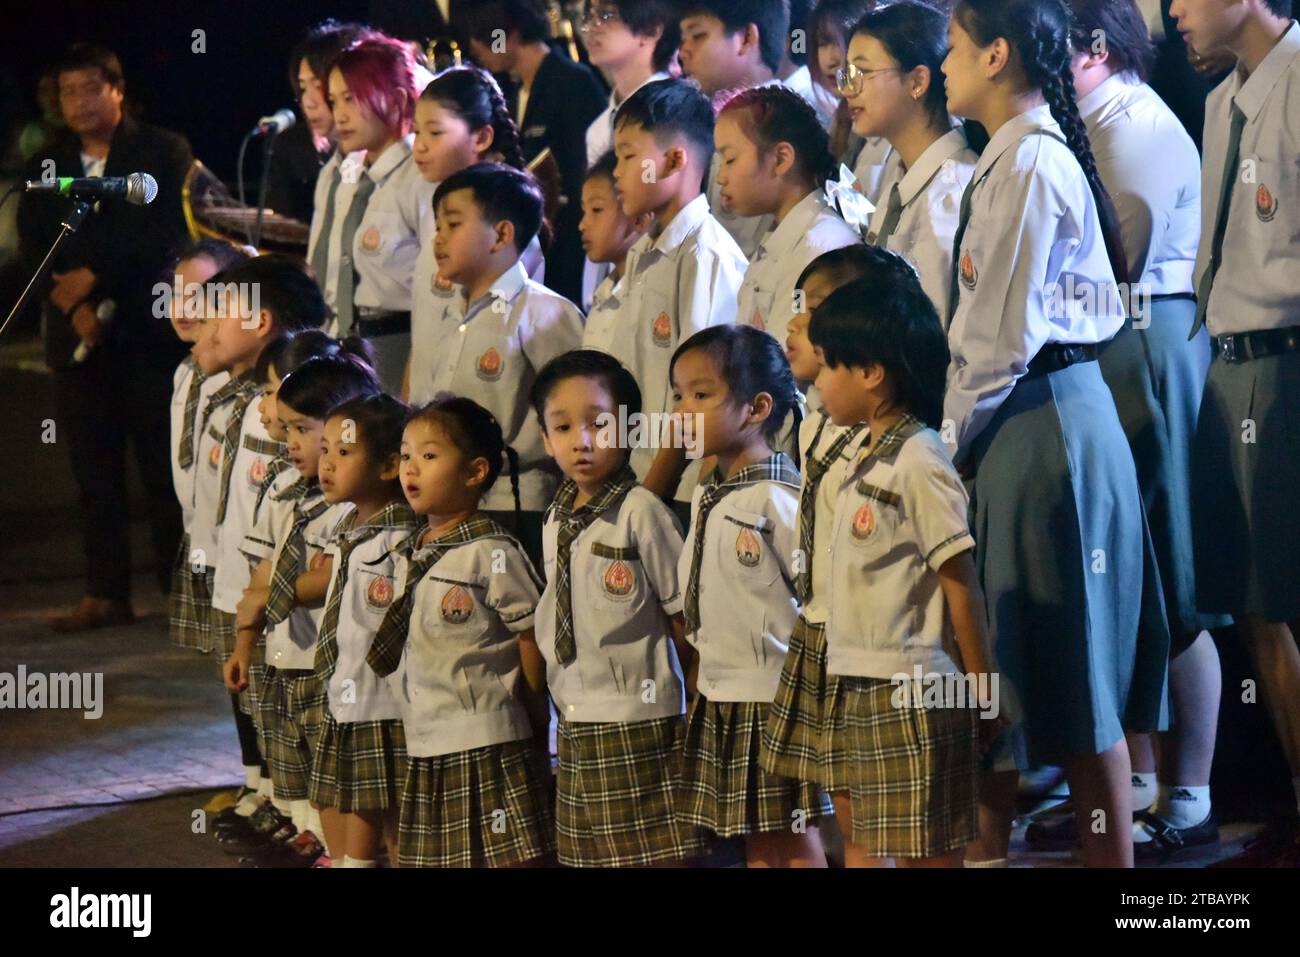 Young people and students attending local schools and colleges and universities in Nakhon Phanom, Isaan, Thailand, South East Asia, perform in a concert to display their musical and dancing abilities in the evening of 5th December, 2023. The venue was outdoors beside the river and was free for anyone to attend in the balmy temperature. Stock Photo